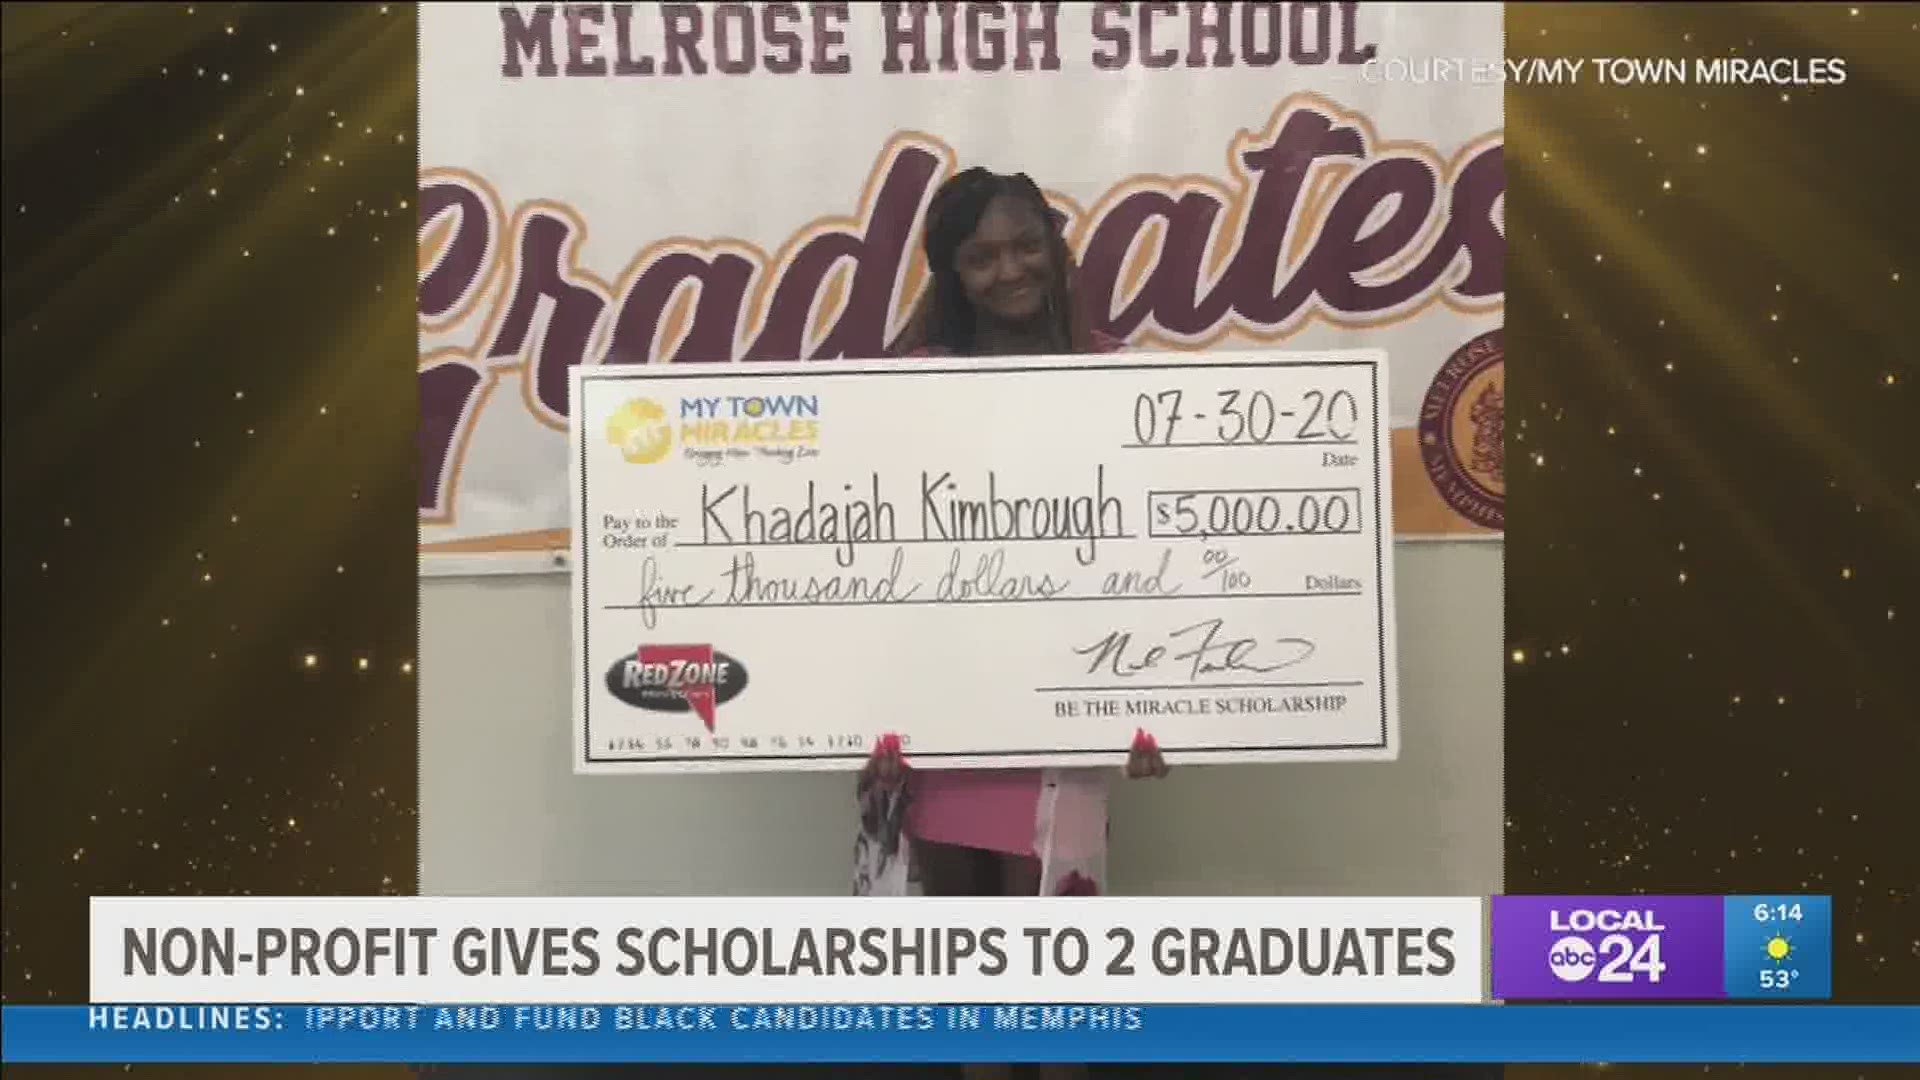 My Town Miracles has started something new. It's called "Be the Miracle Scholarship."